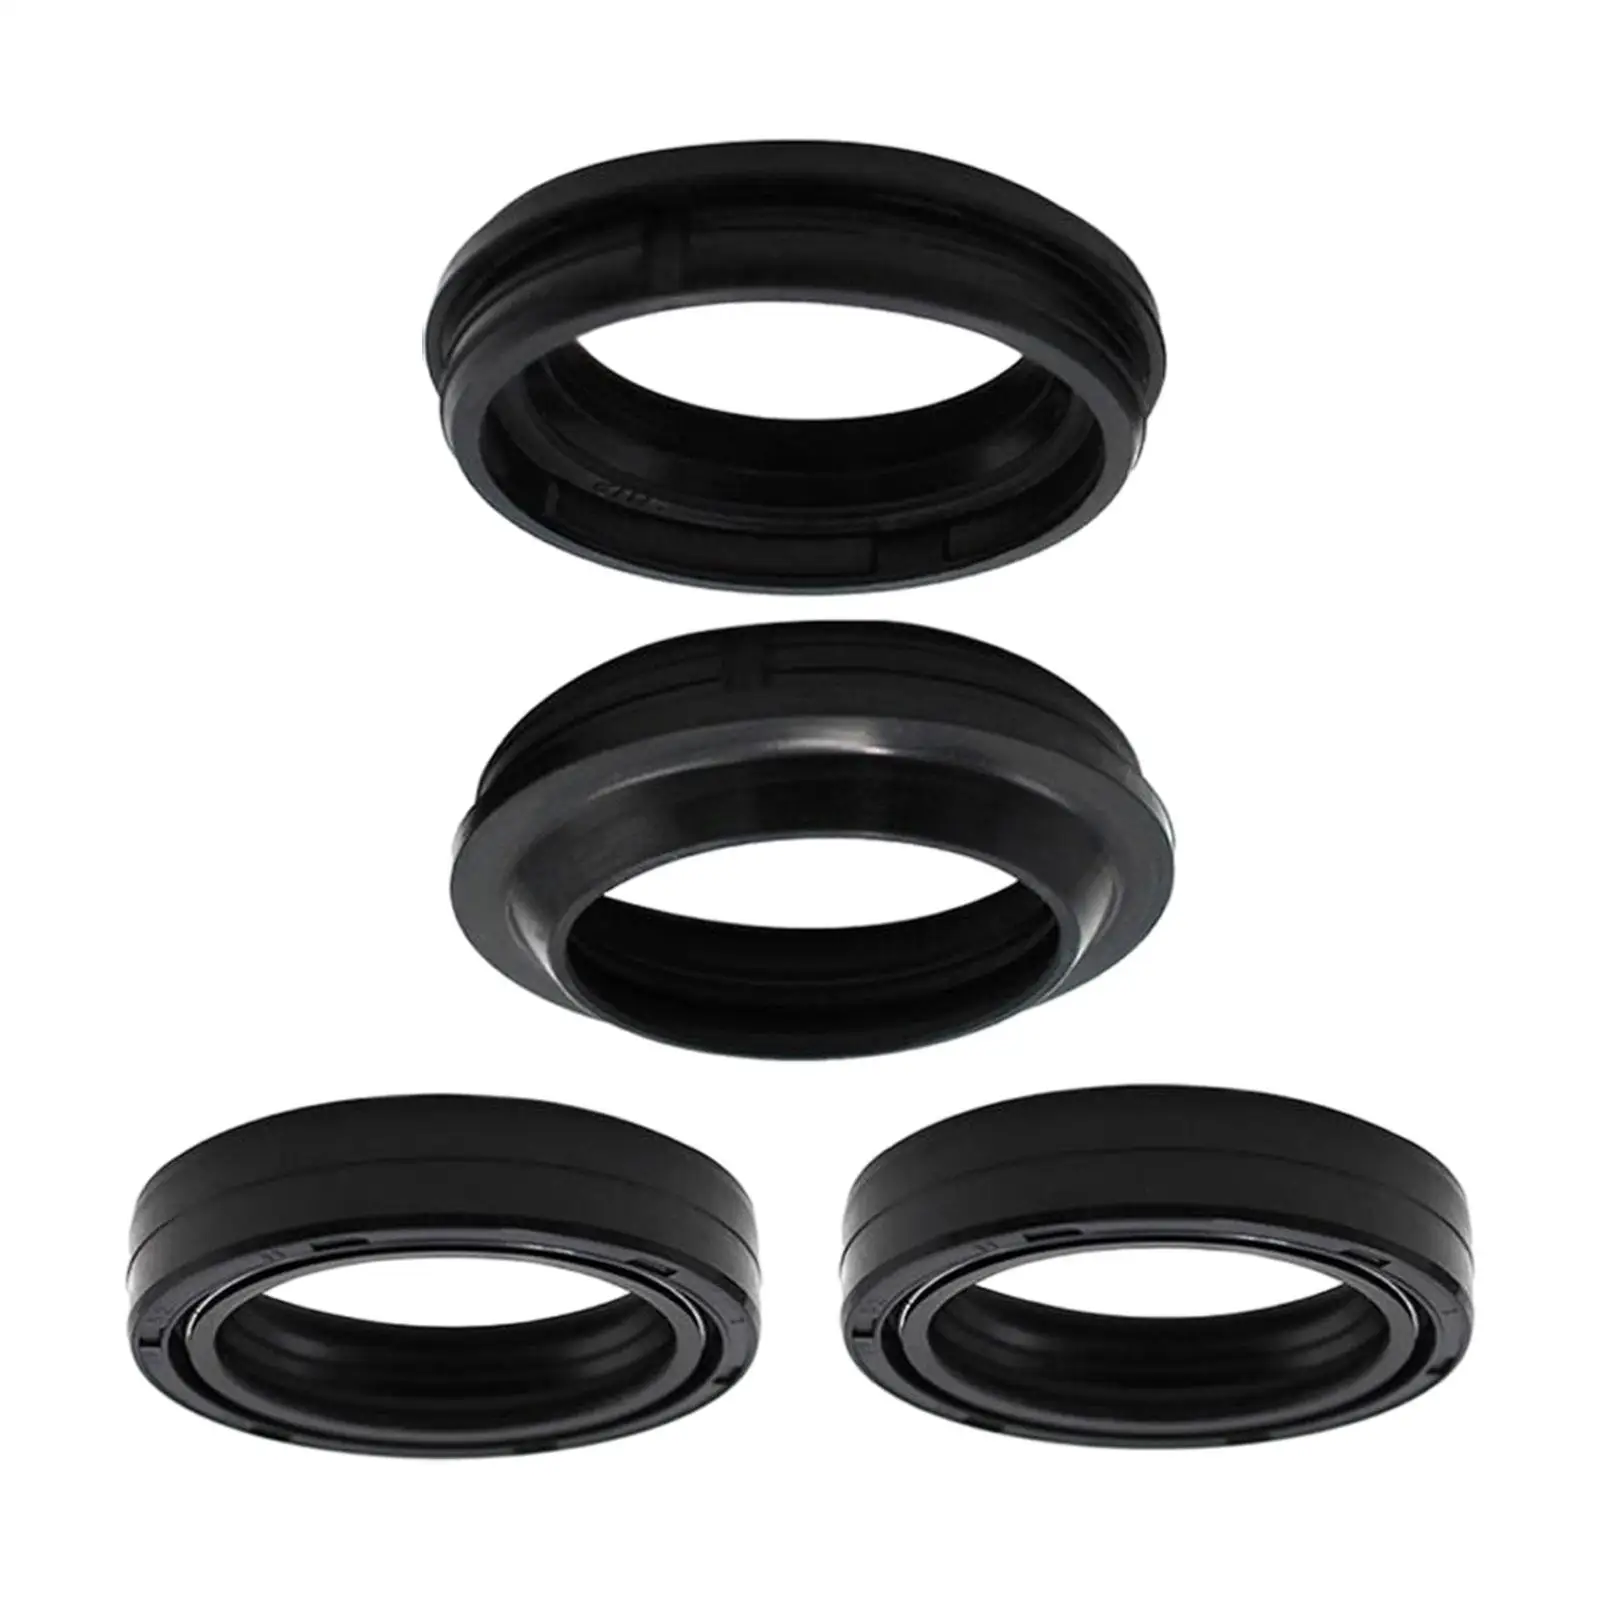 4 Pieces 36x48x11mm Durable Motorcycle Front Fork Damper Oil Seal and Dust Seal for Yamaha XT 125 R Bra 2007 1D4-f2480-00